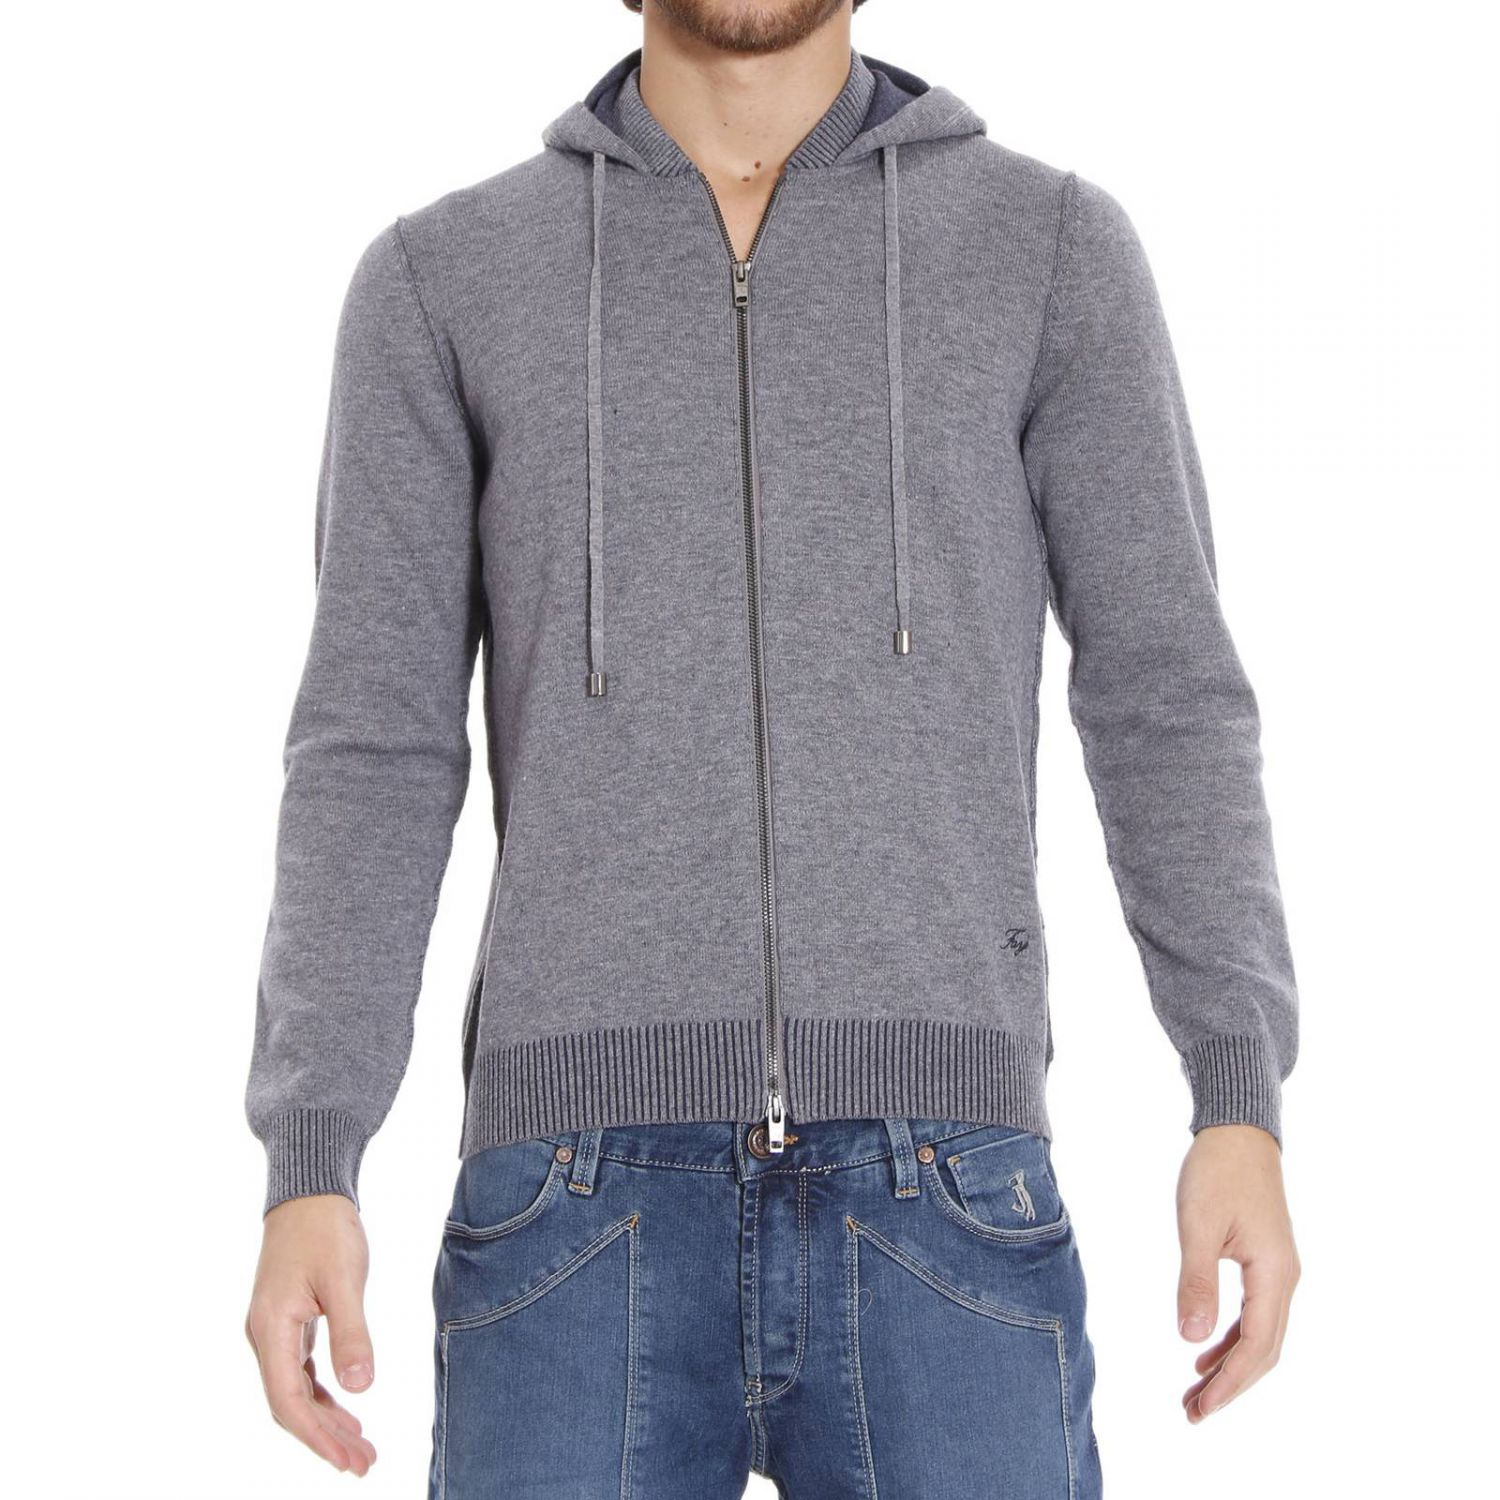 Lyst - Fay Sweater in Gray for Men